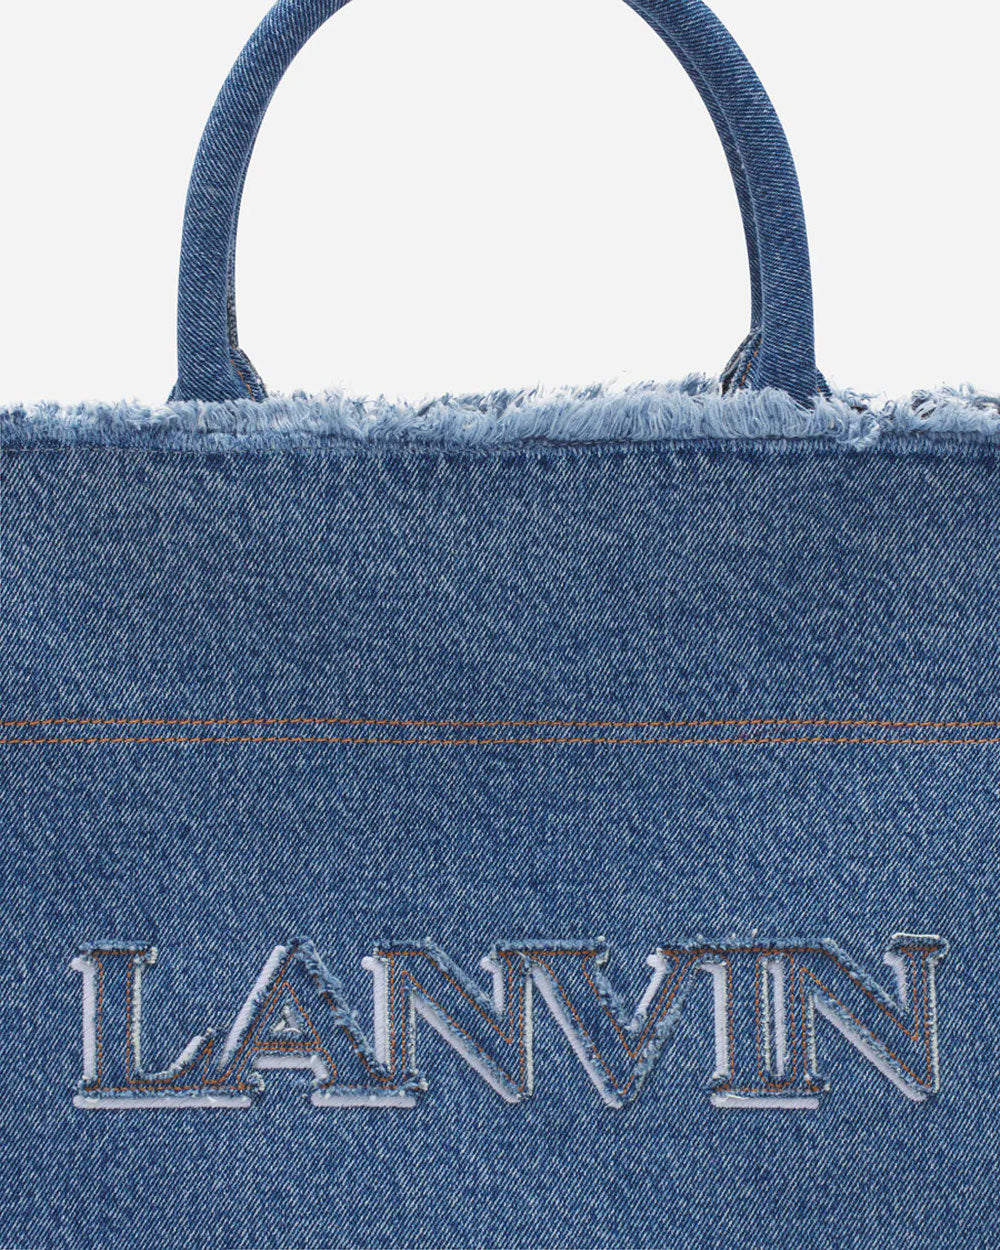 In & Out MM Tote Bag in Denim